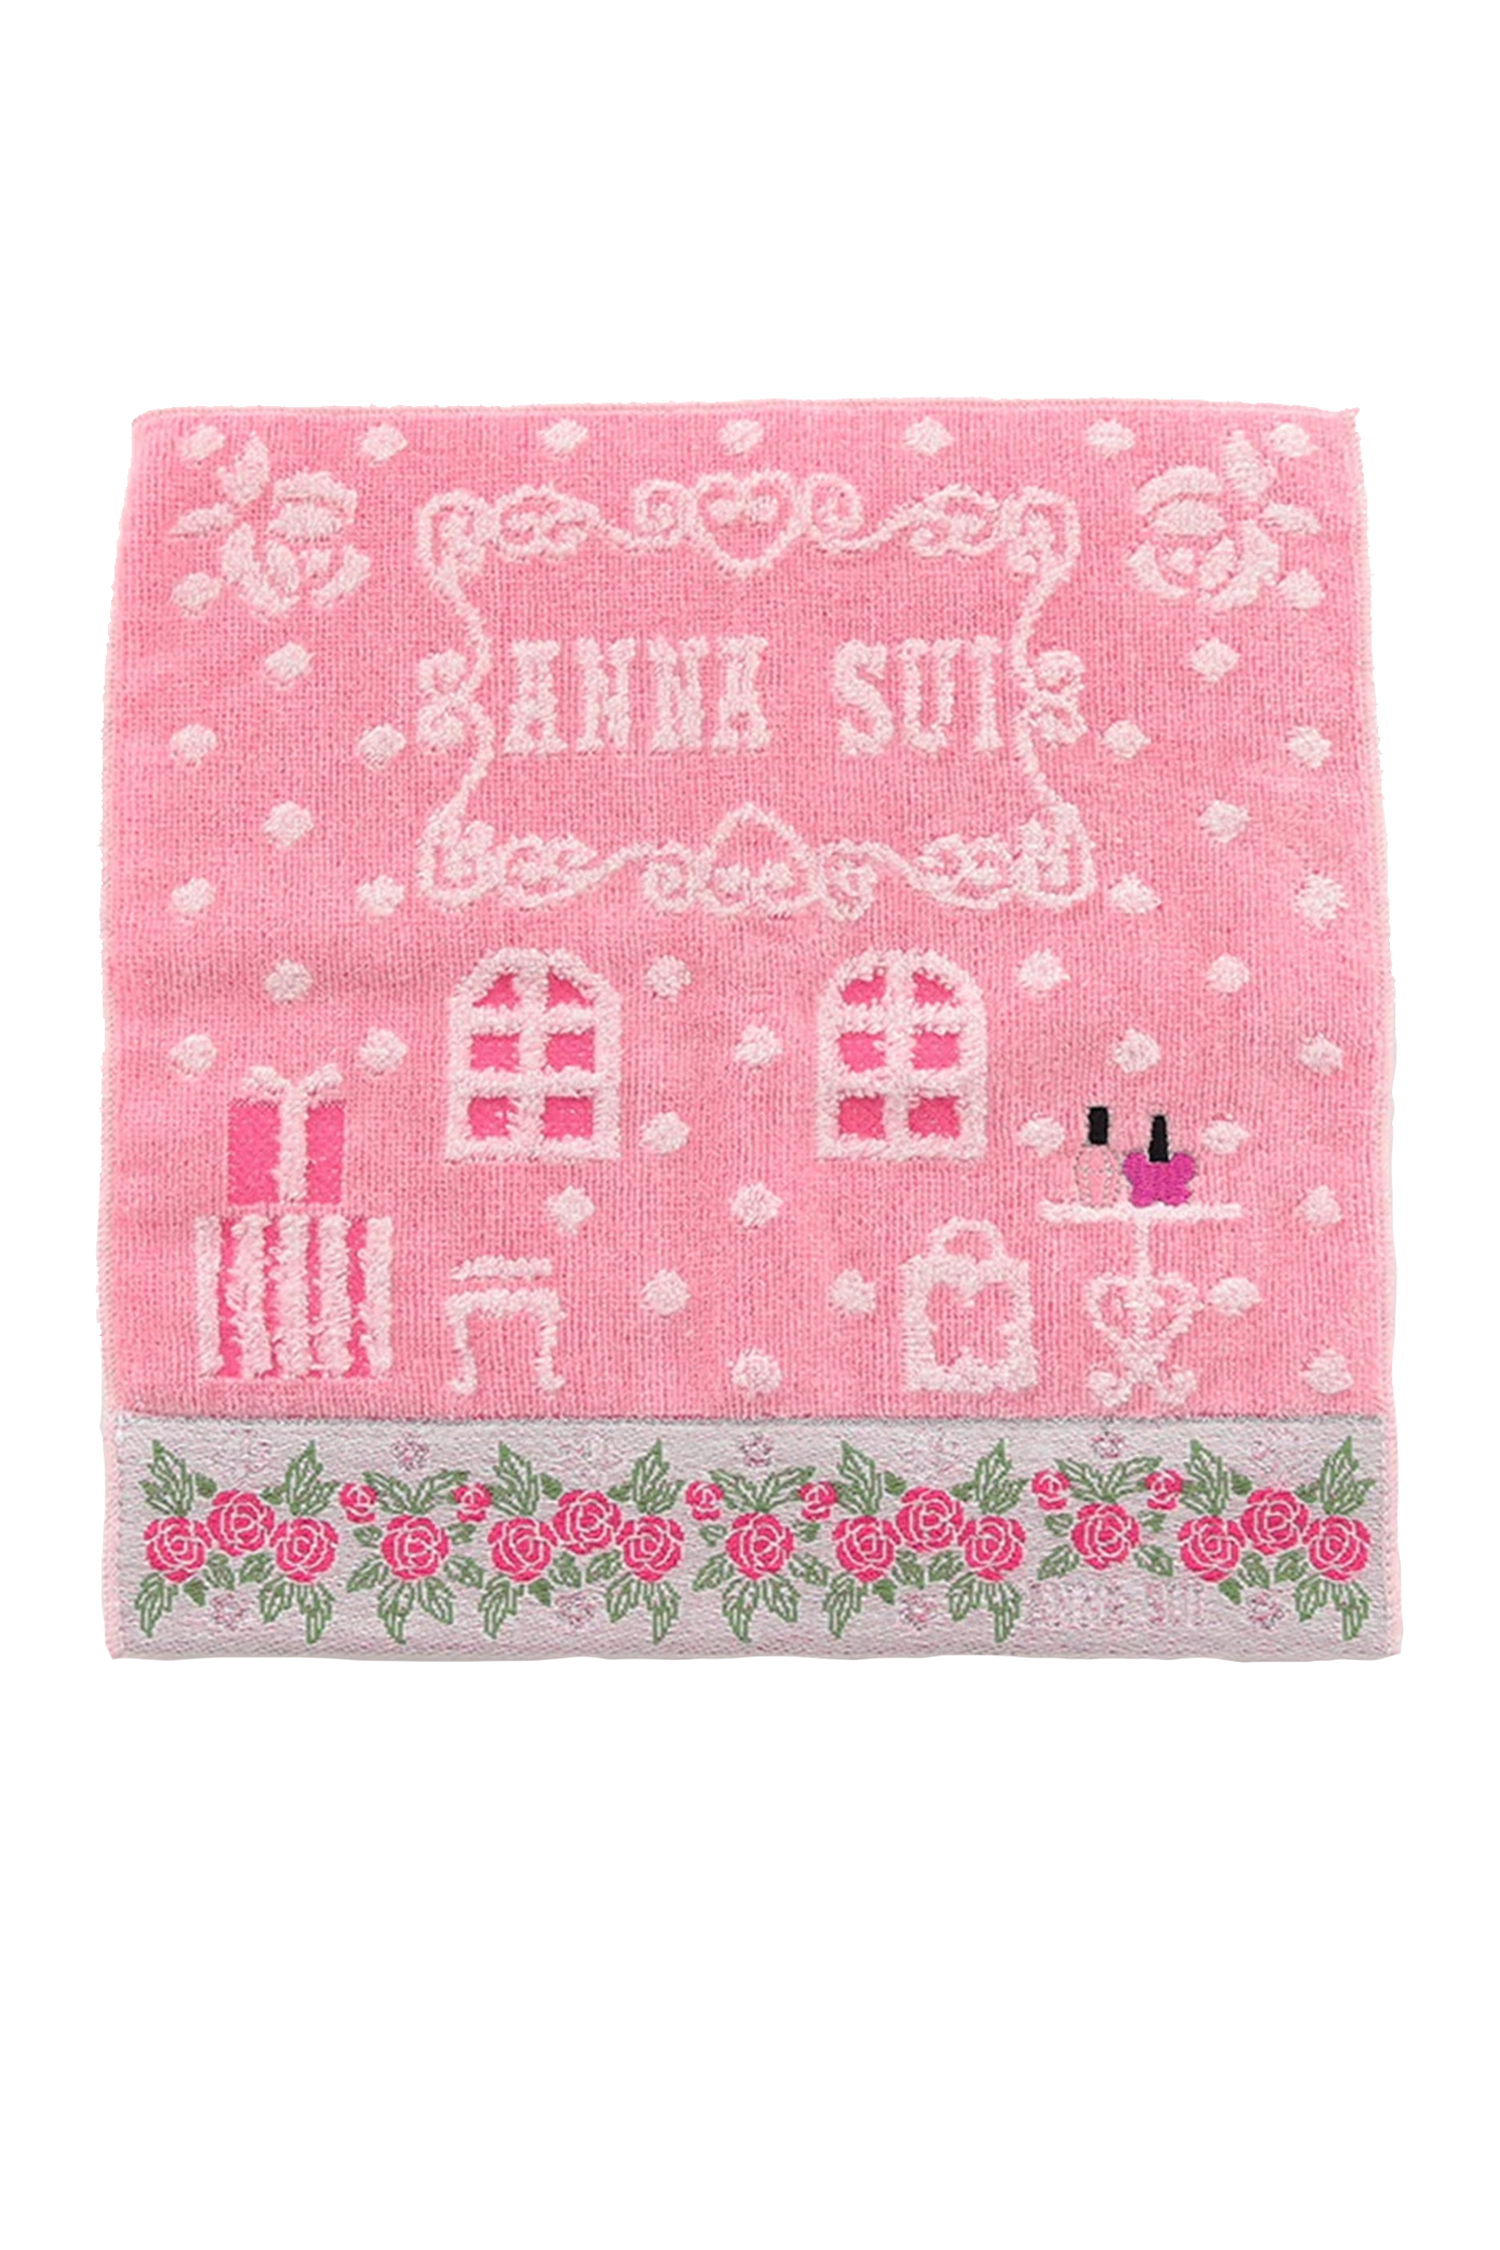 Washcloth, baby pink, white shop design, Anna Sui label, presents, table, bottom with pink roses line